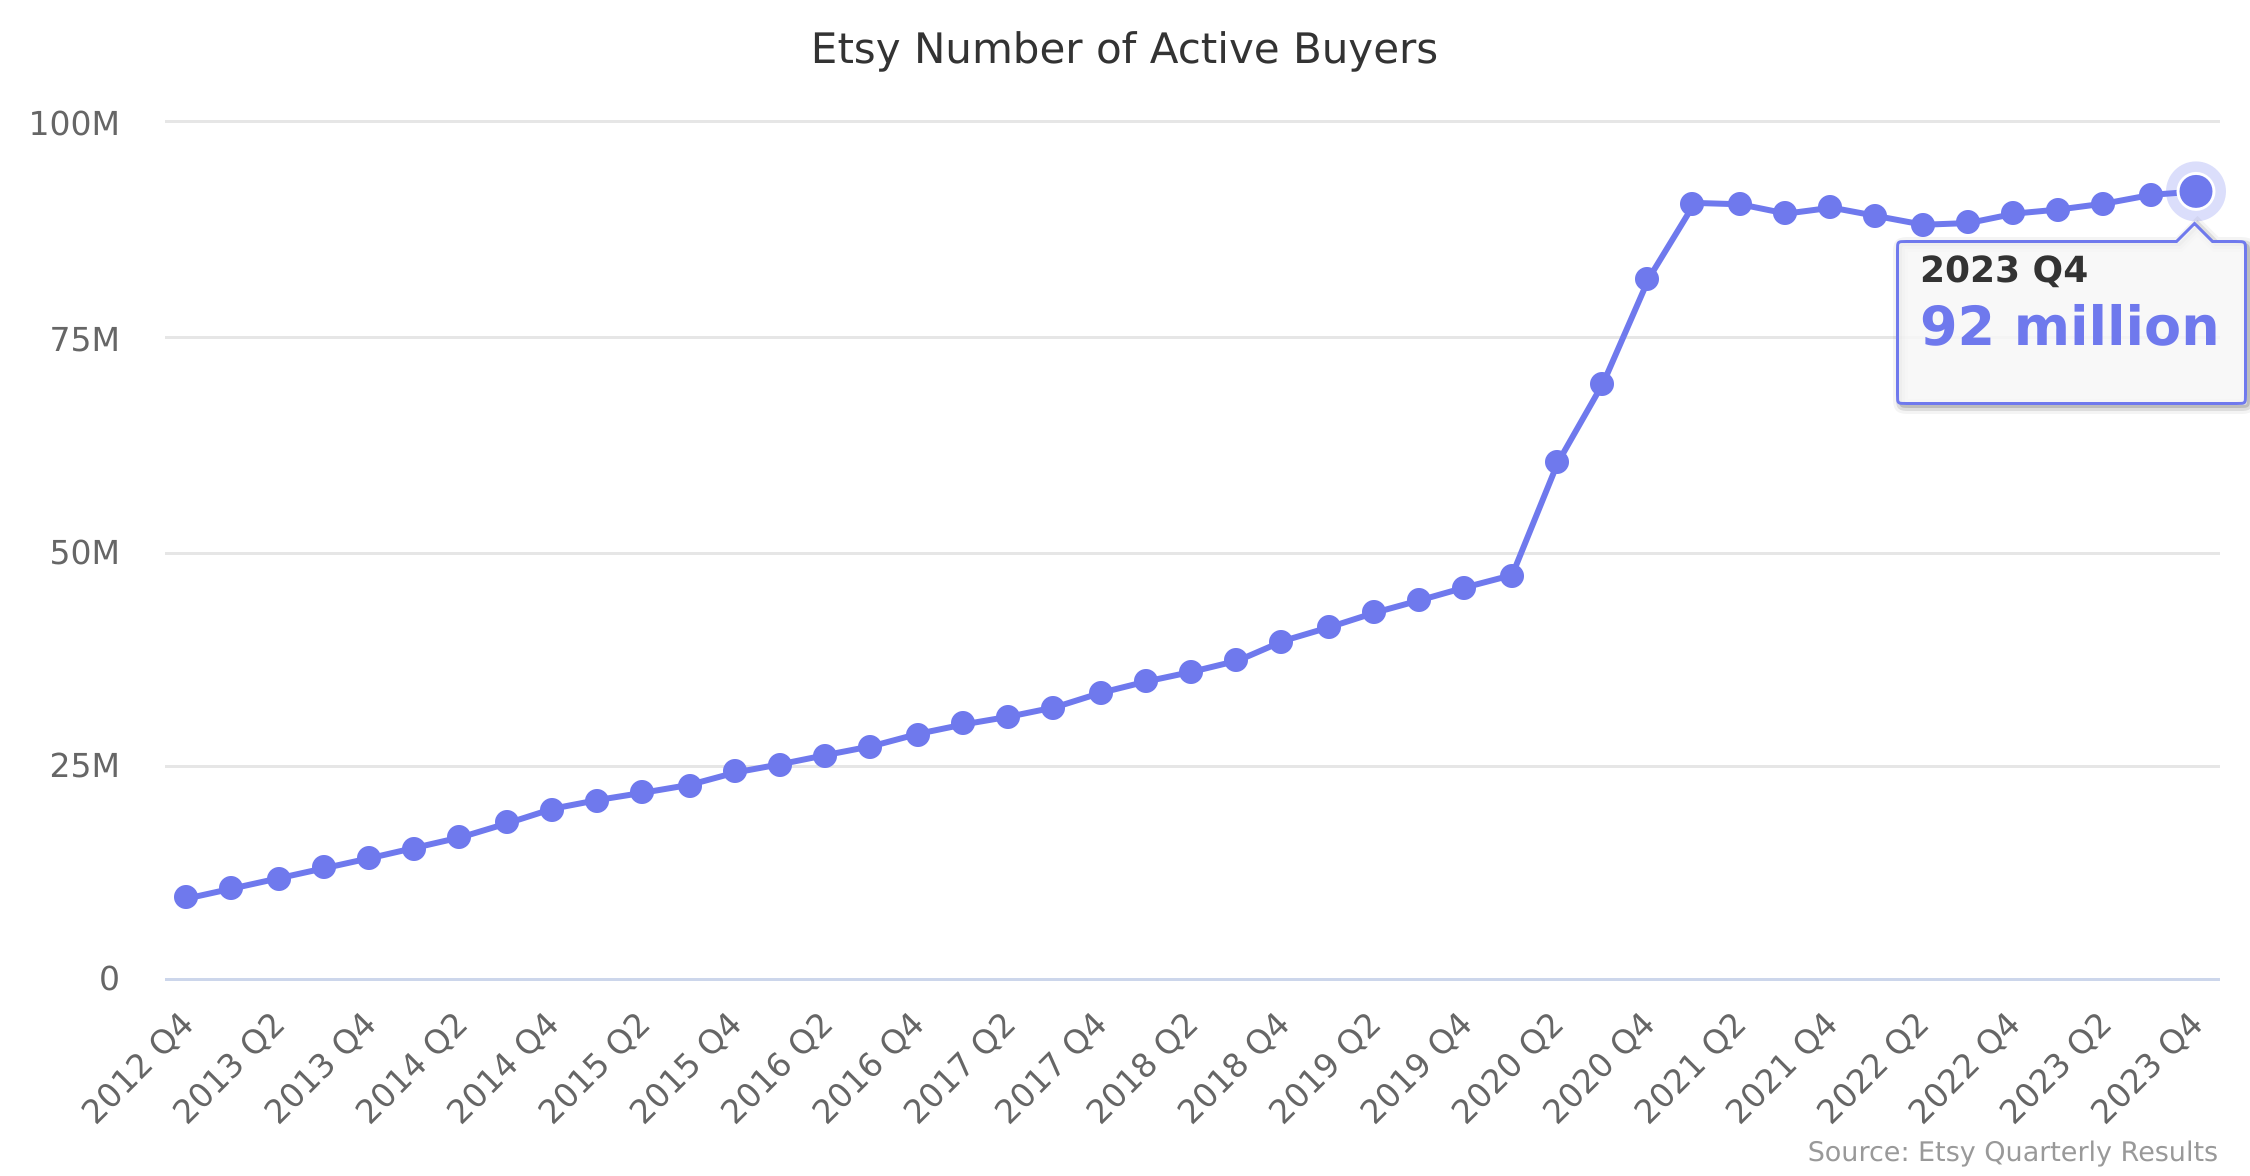 Etsy Number of Active Buyers